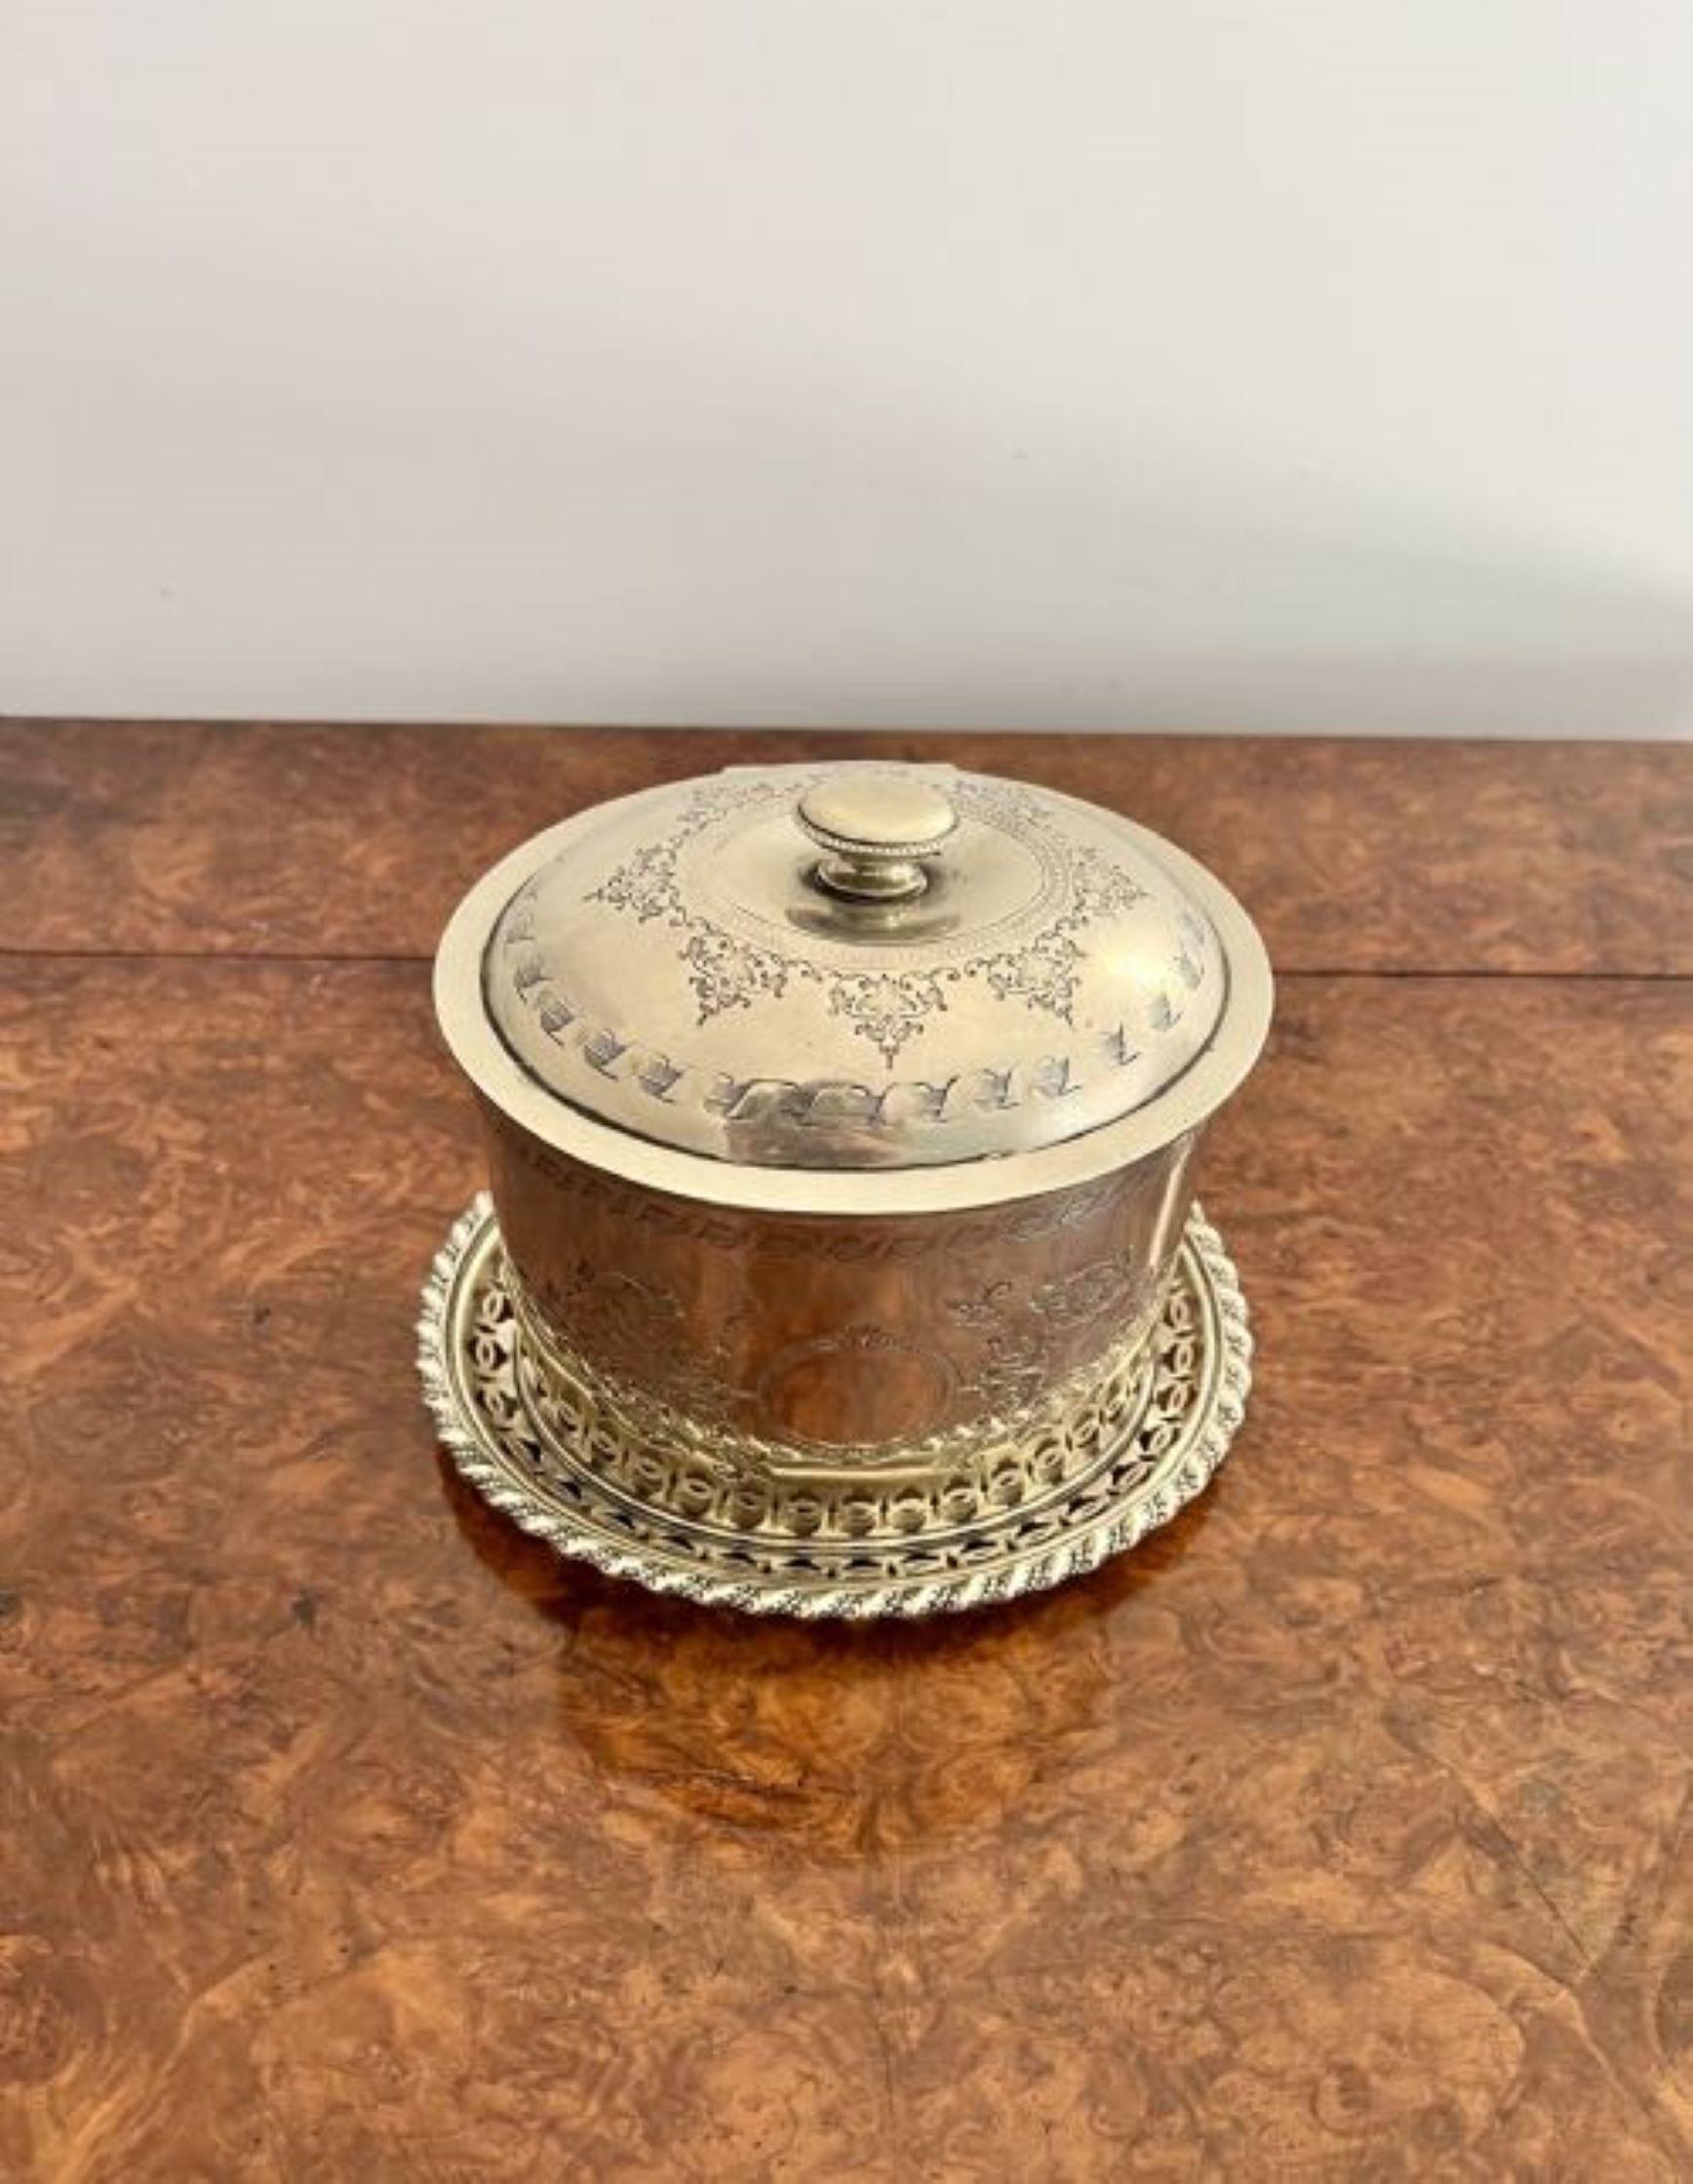 Lovely antique Edwardian silver plated biscuit barrel having a quality antique Edwardian silver plated biscuit barrel with fantastic quality ornate detail throughout with a lift up lid opening to reveal a storage compartment with a oval shaped base.